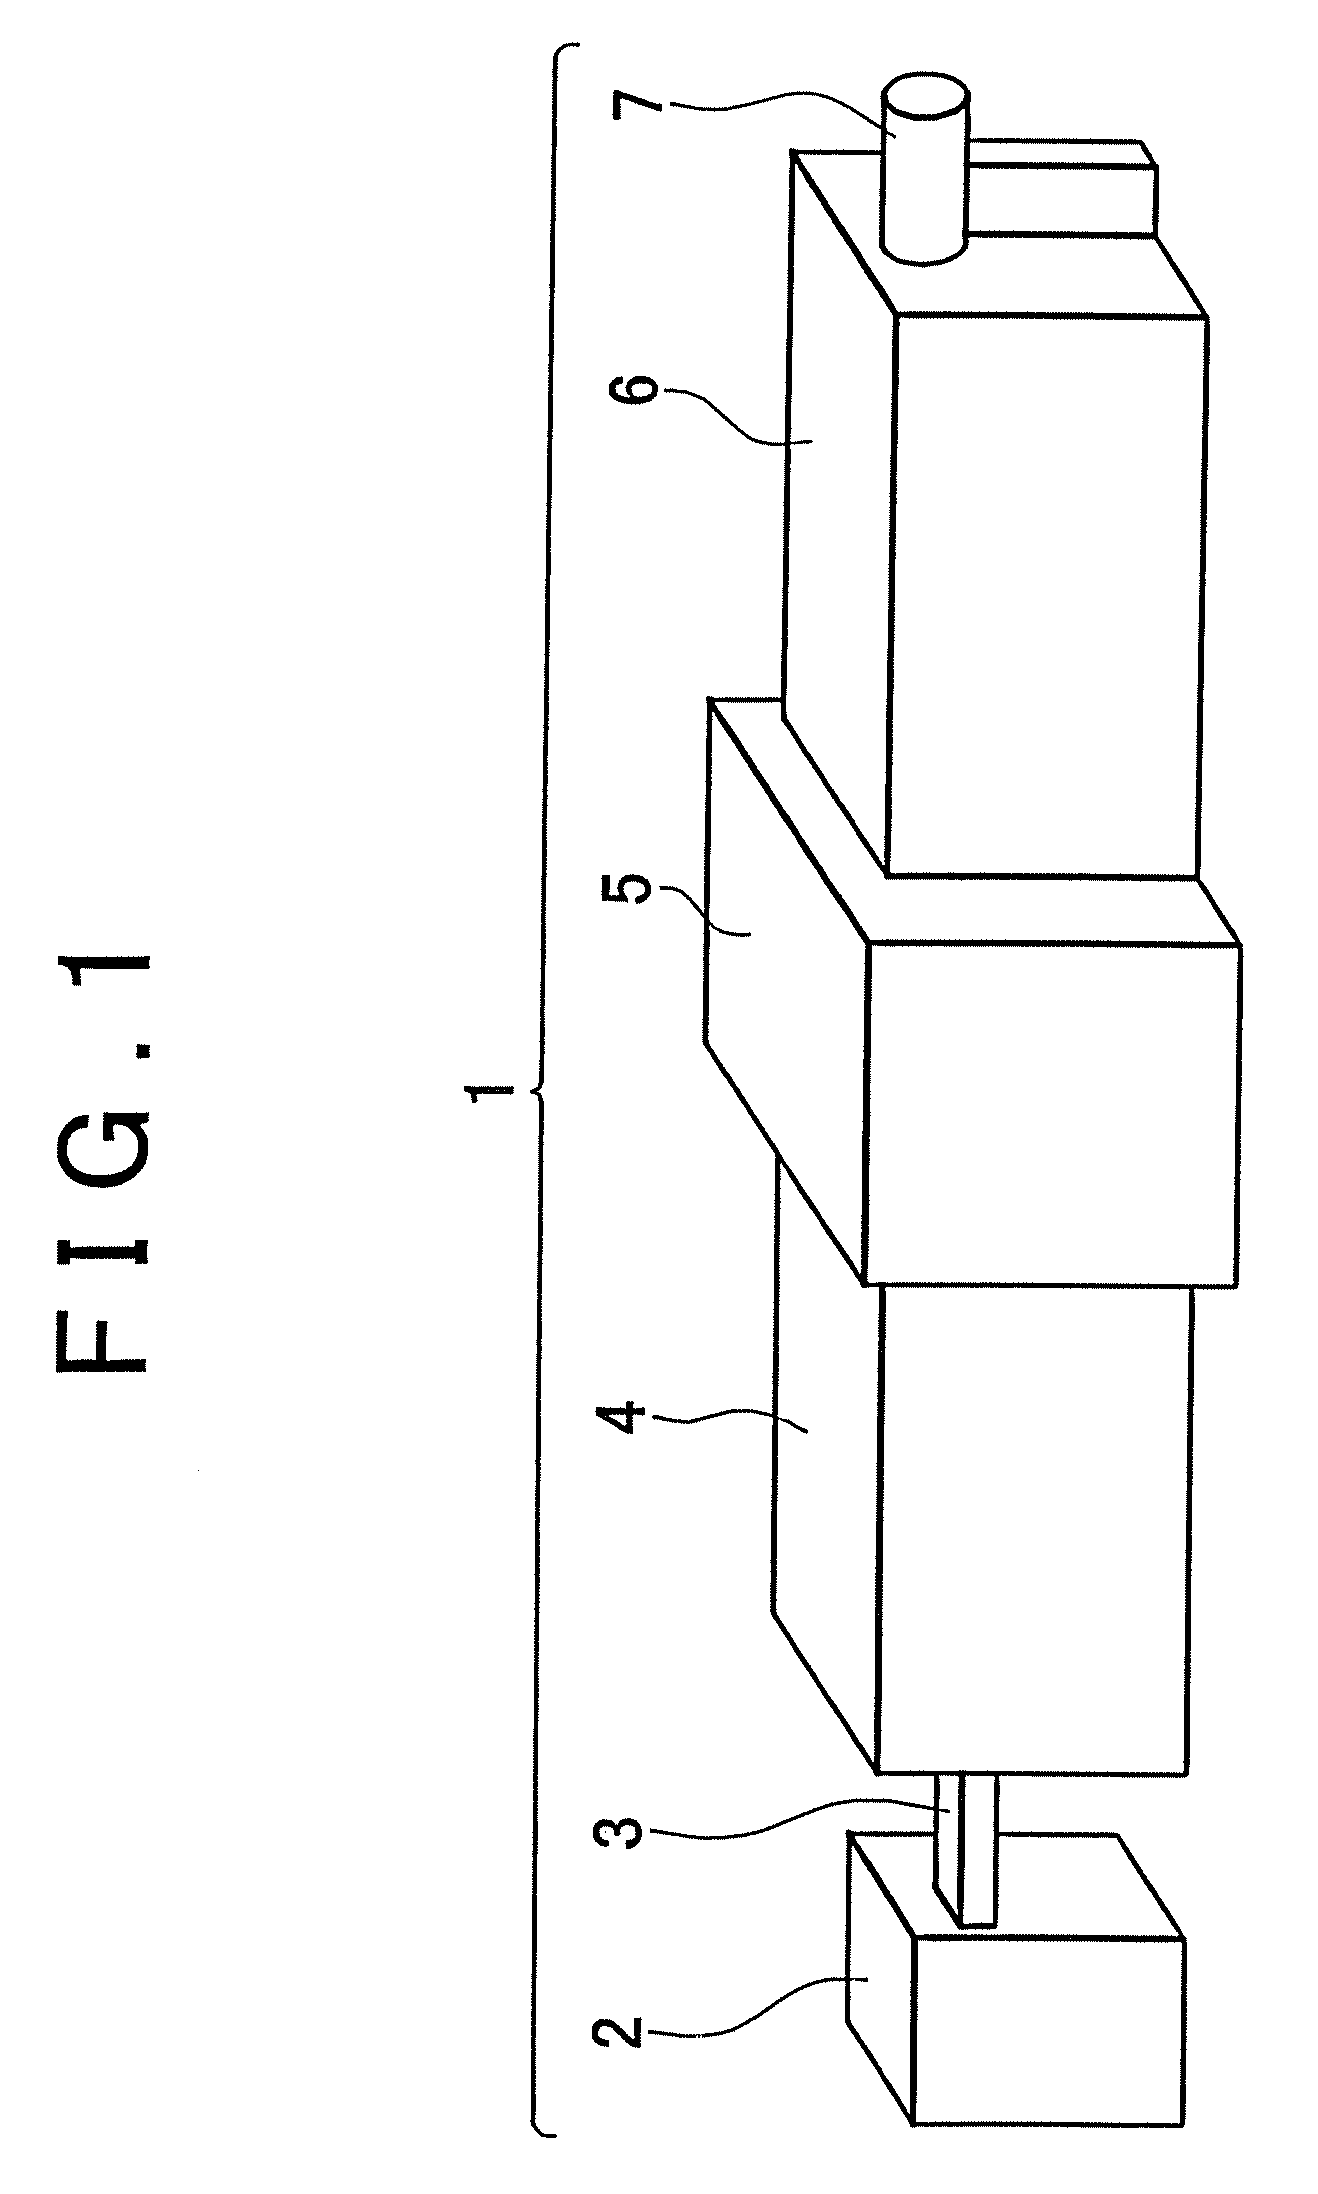 Ultra-small angle x-ray scattering measuring apparatus